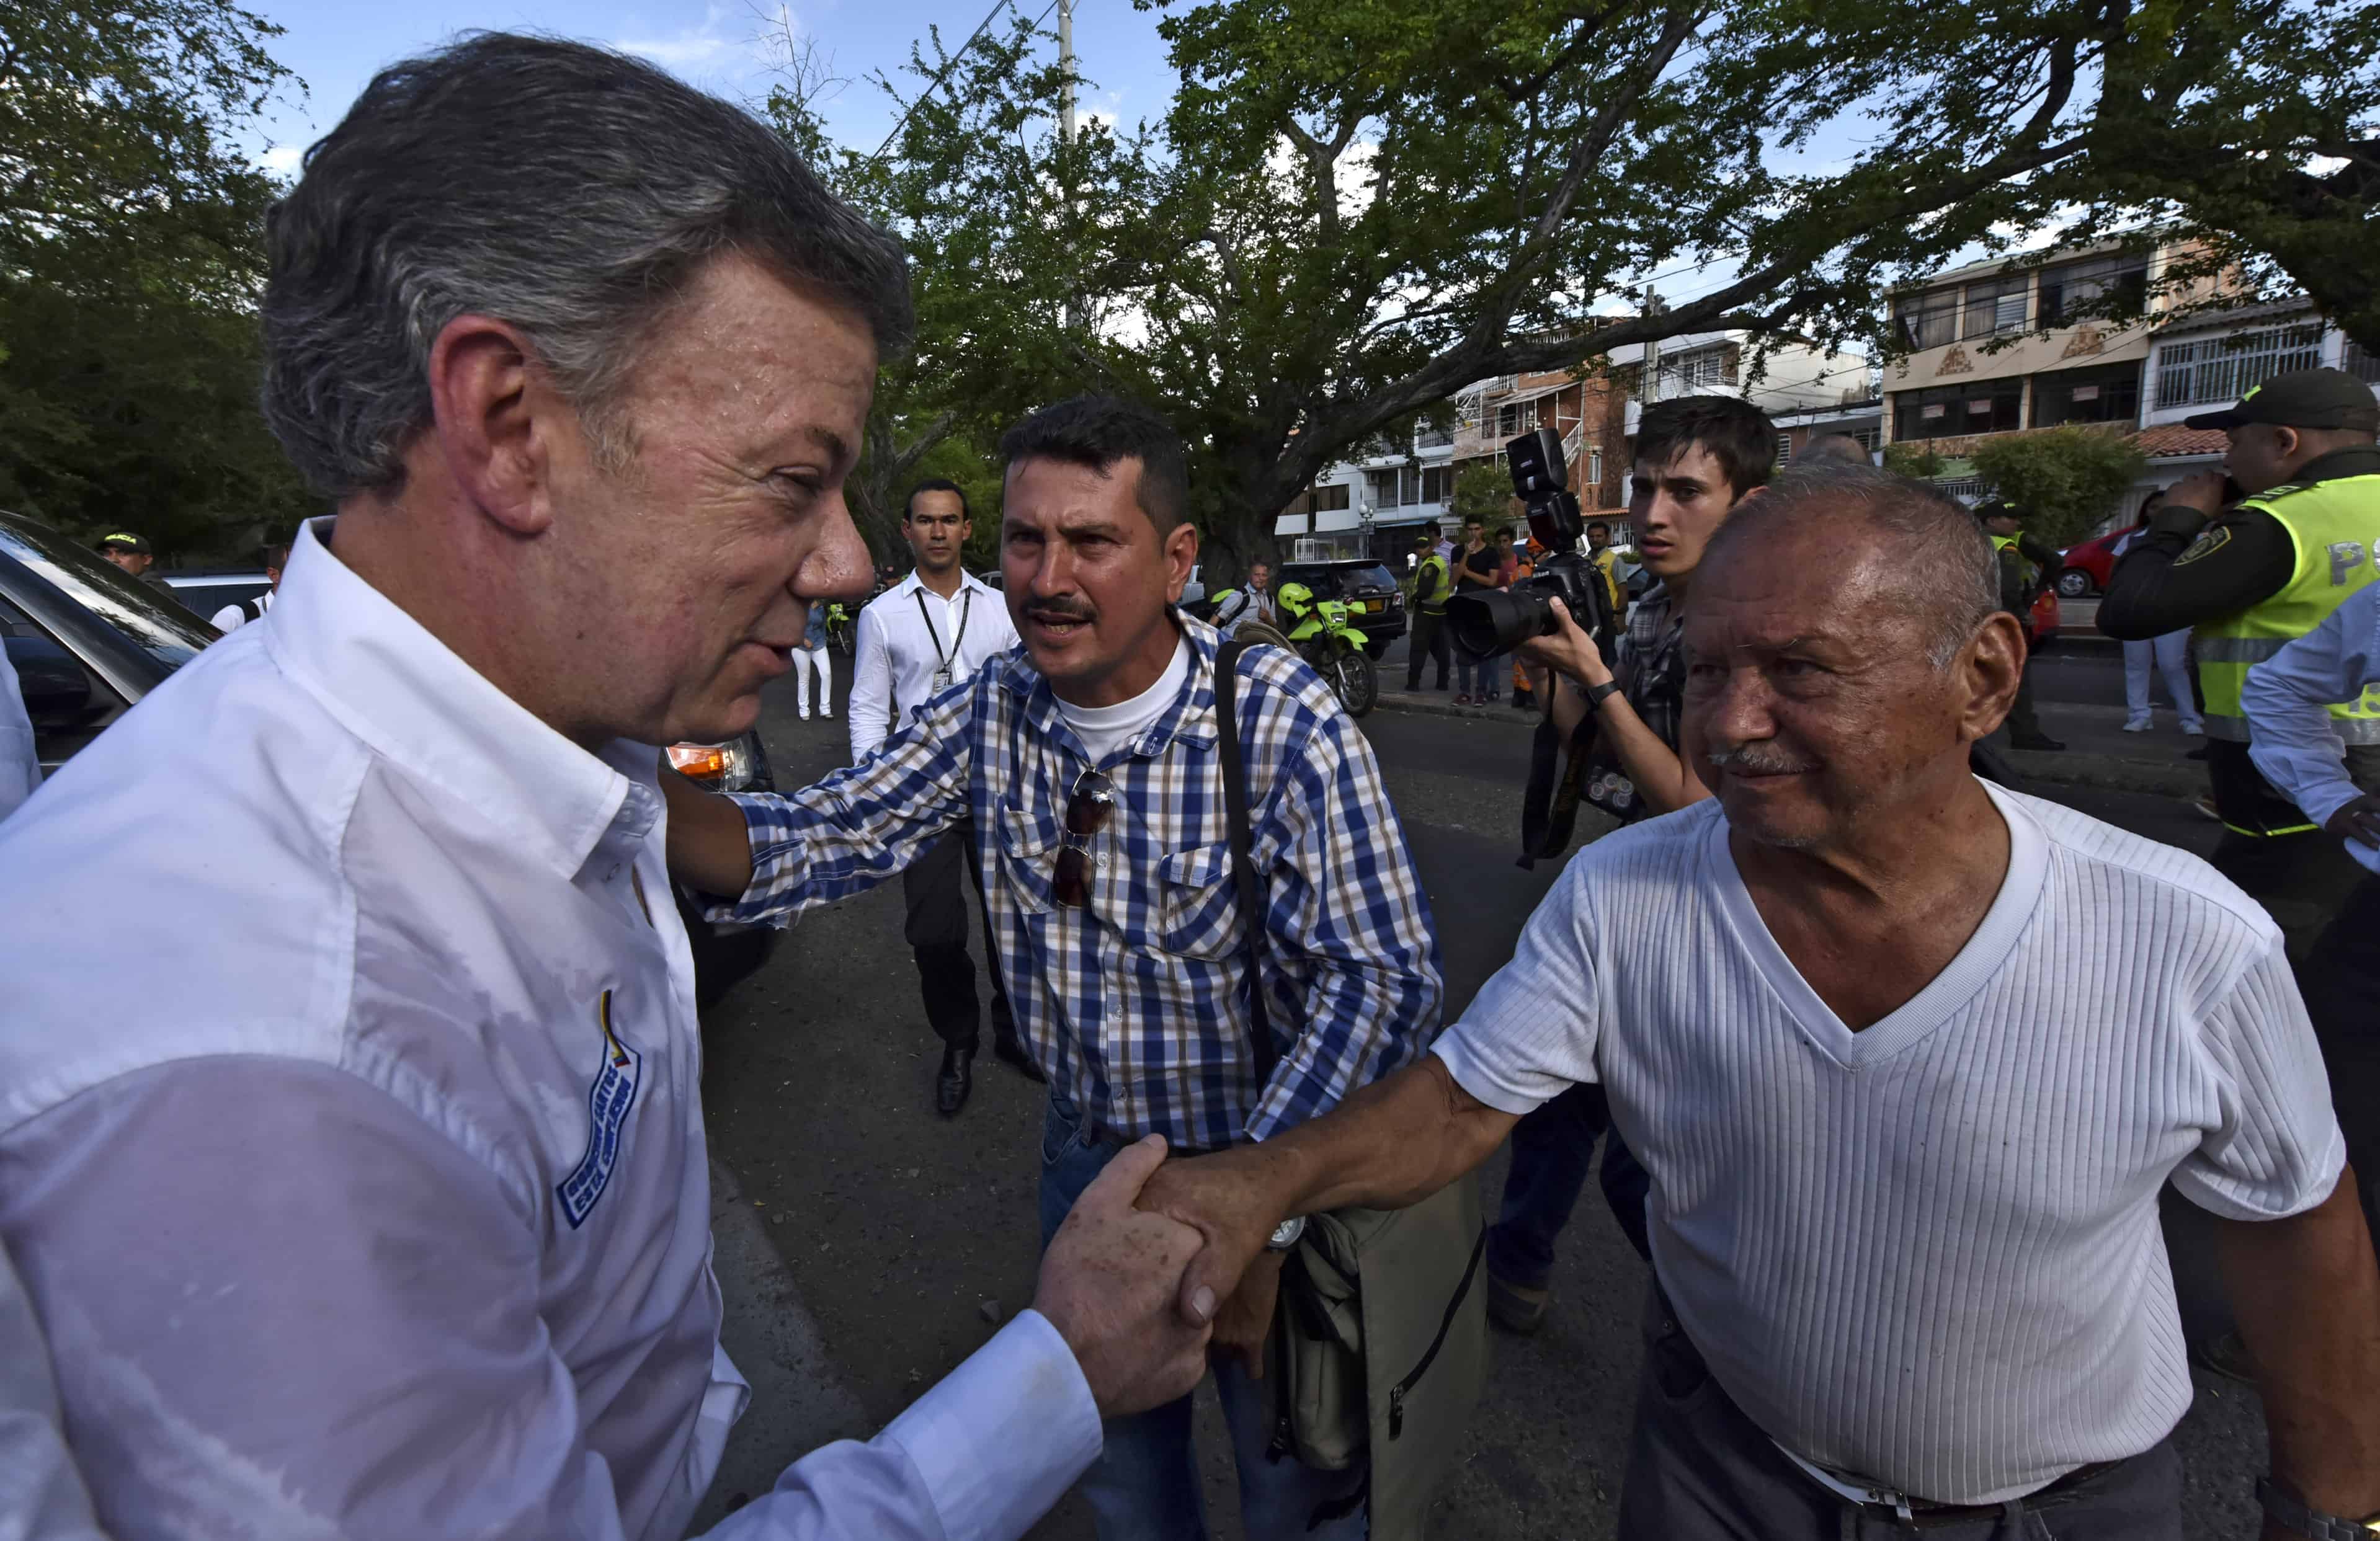 Colombian President Juan Manuel Santos, left, shakes hands with a man during a visit to a shelter in Cucuta, Colombia.